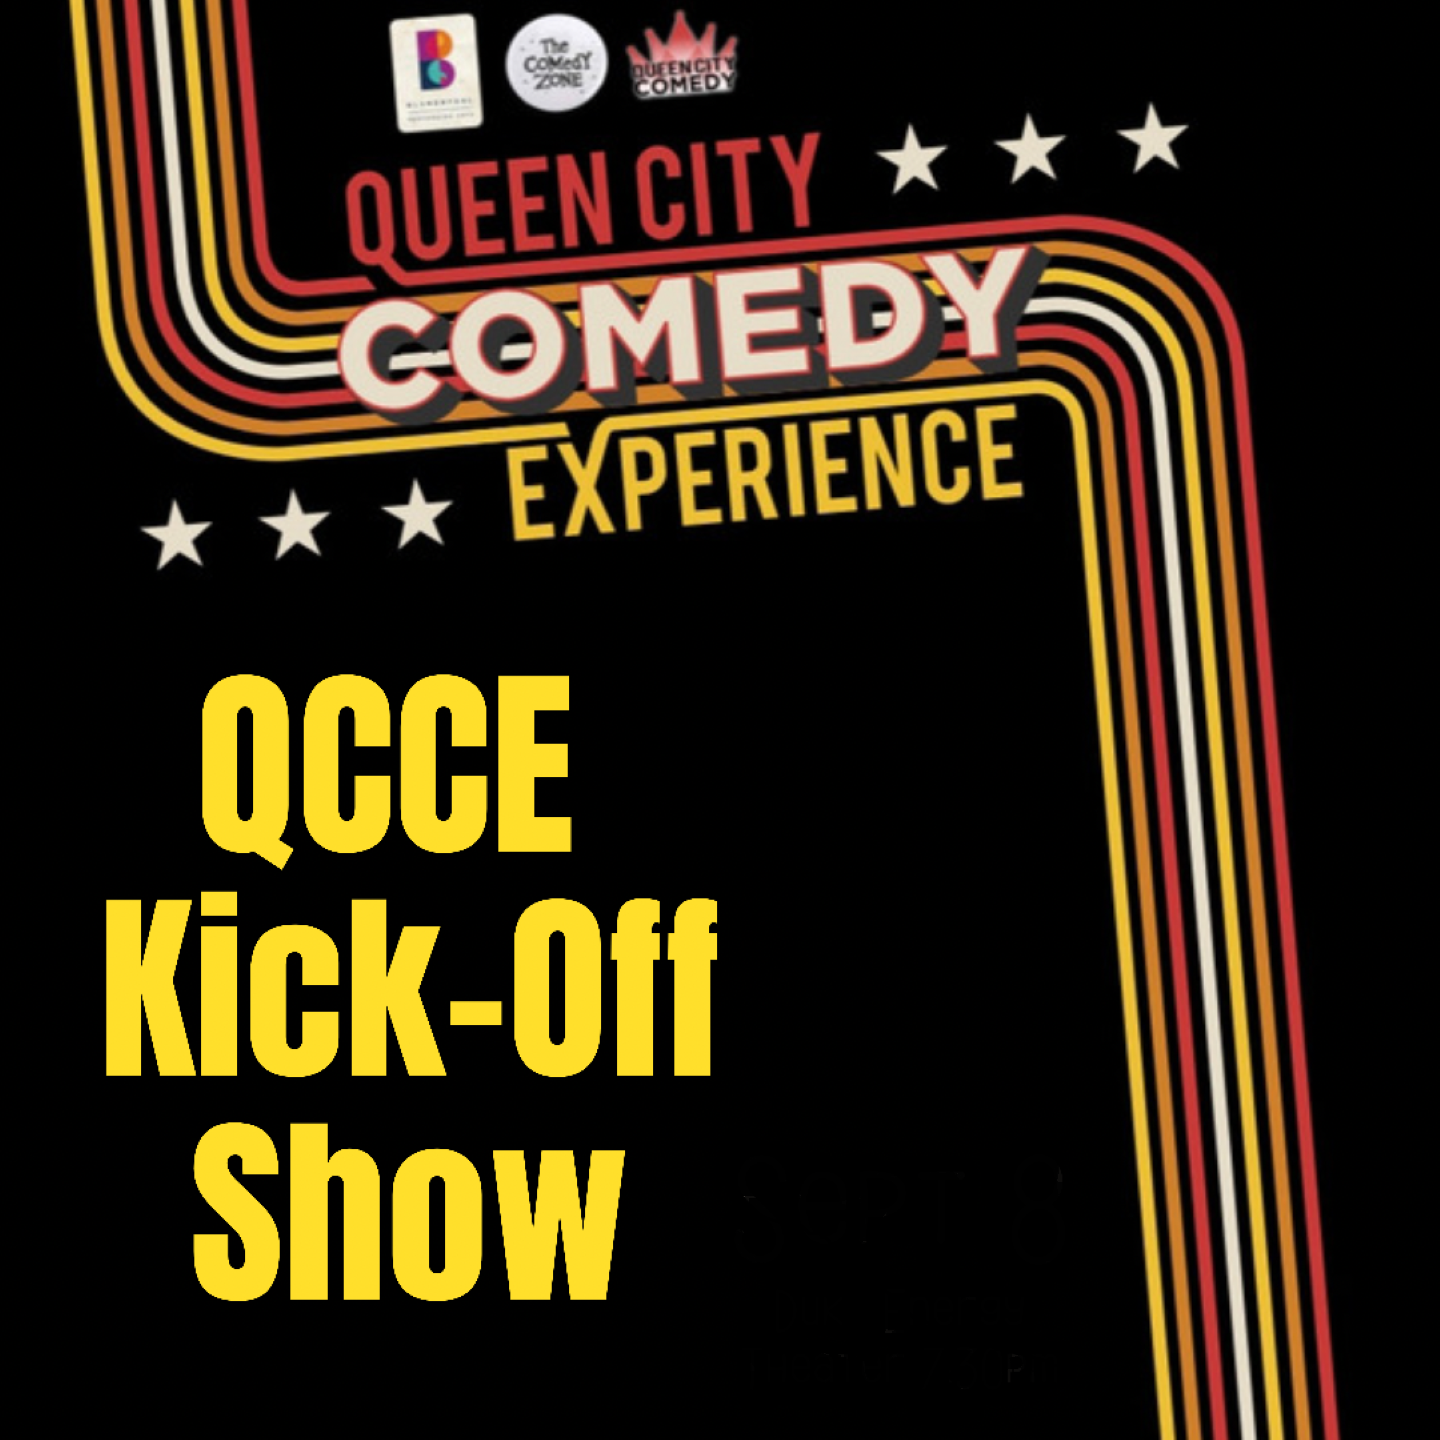 Queen City Comedy Experience Kick Off